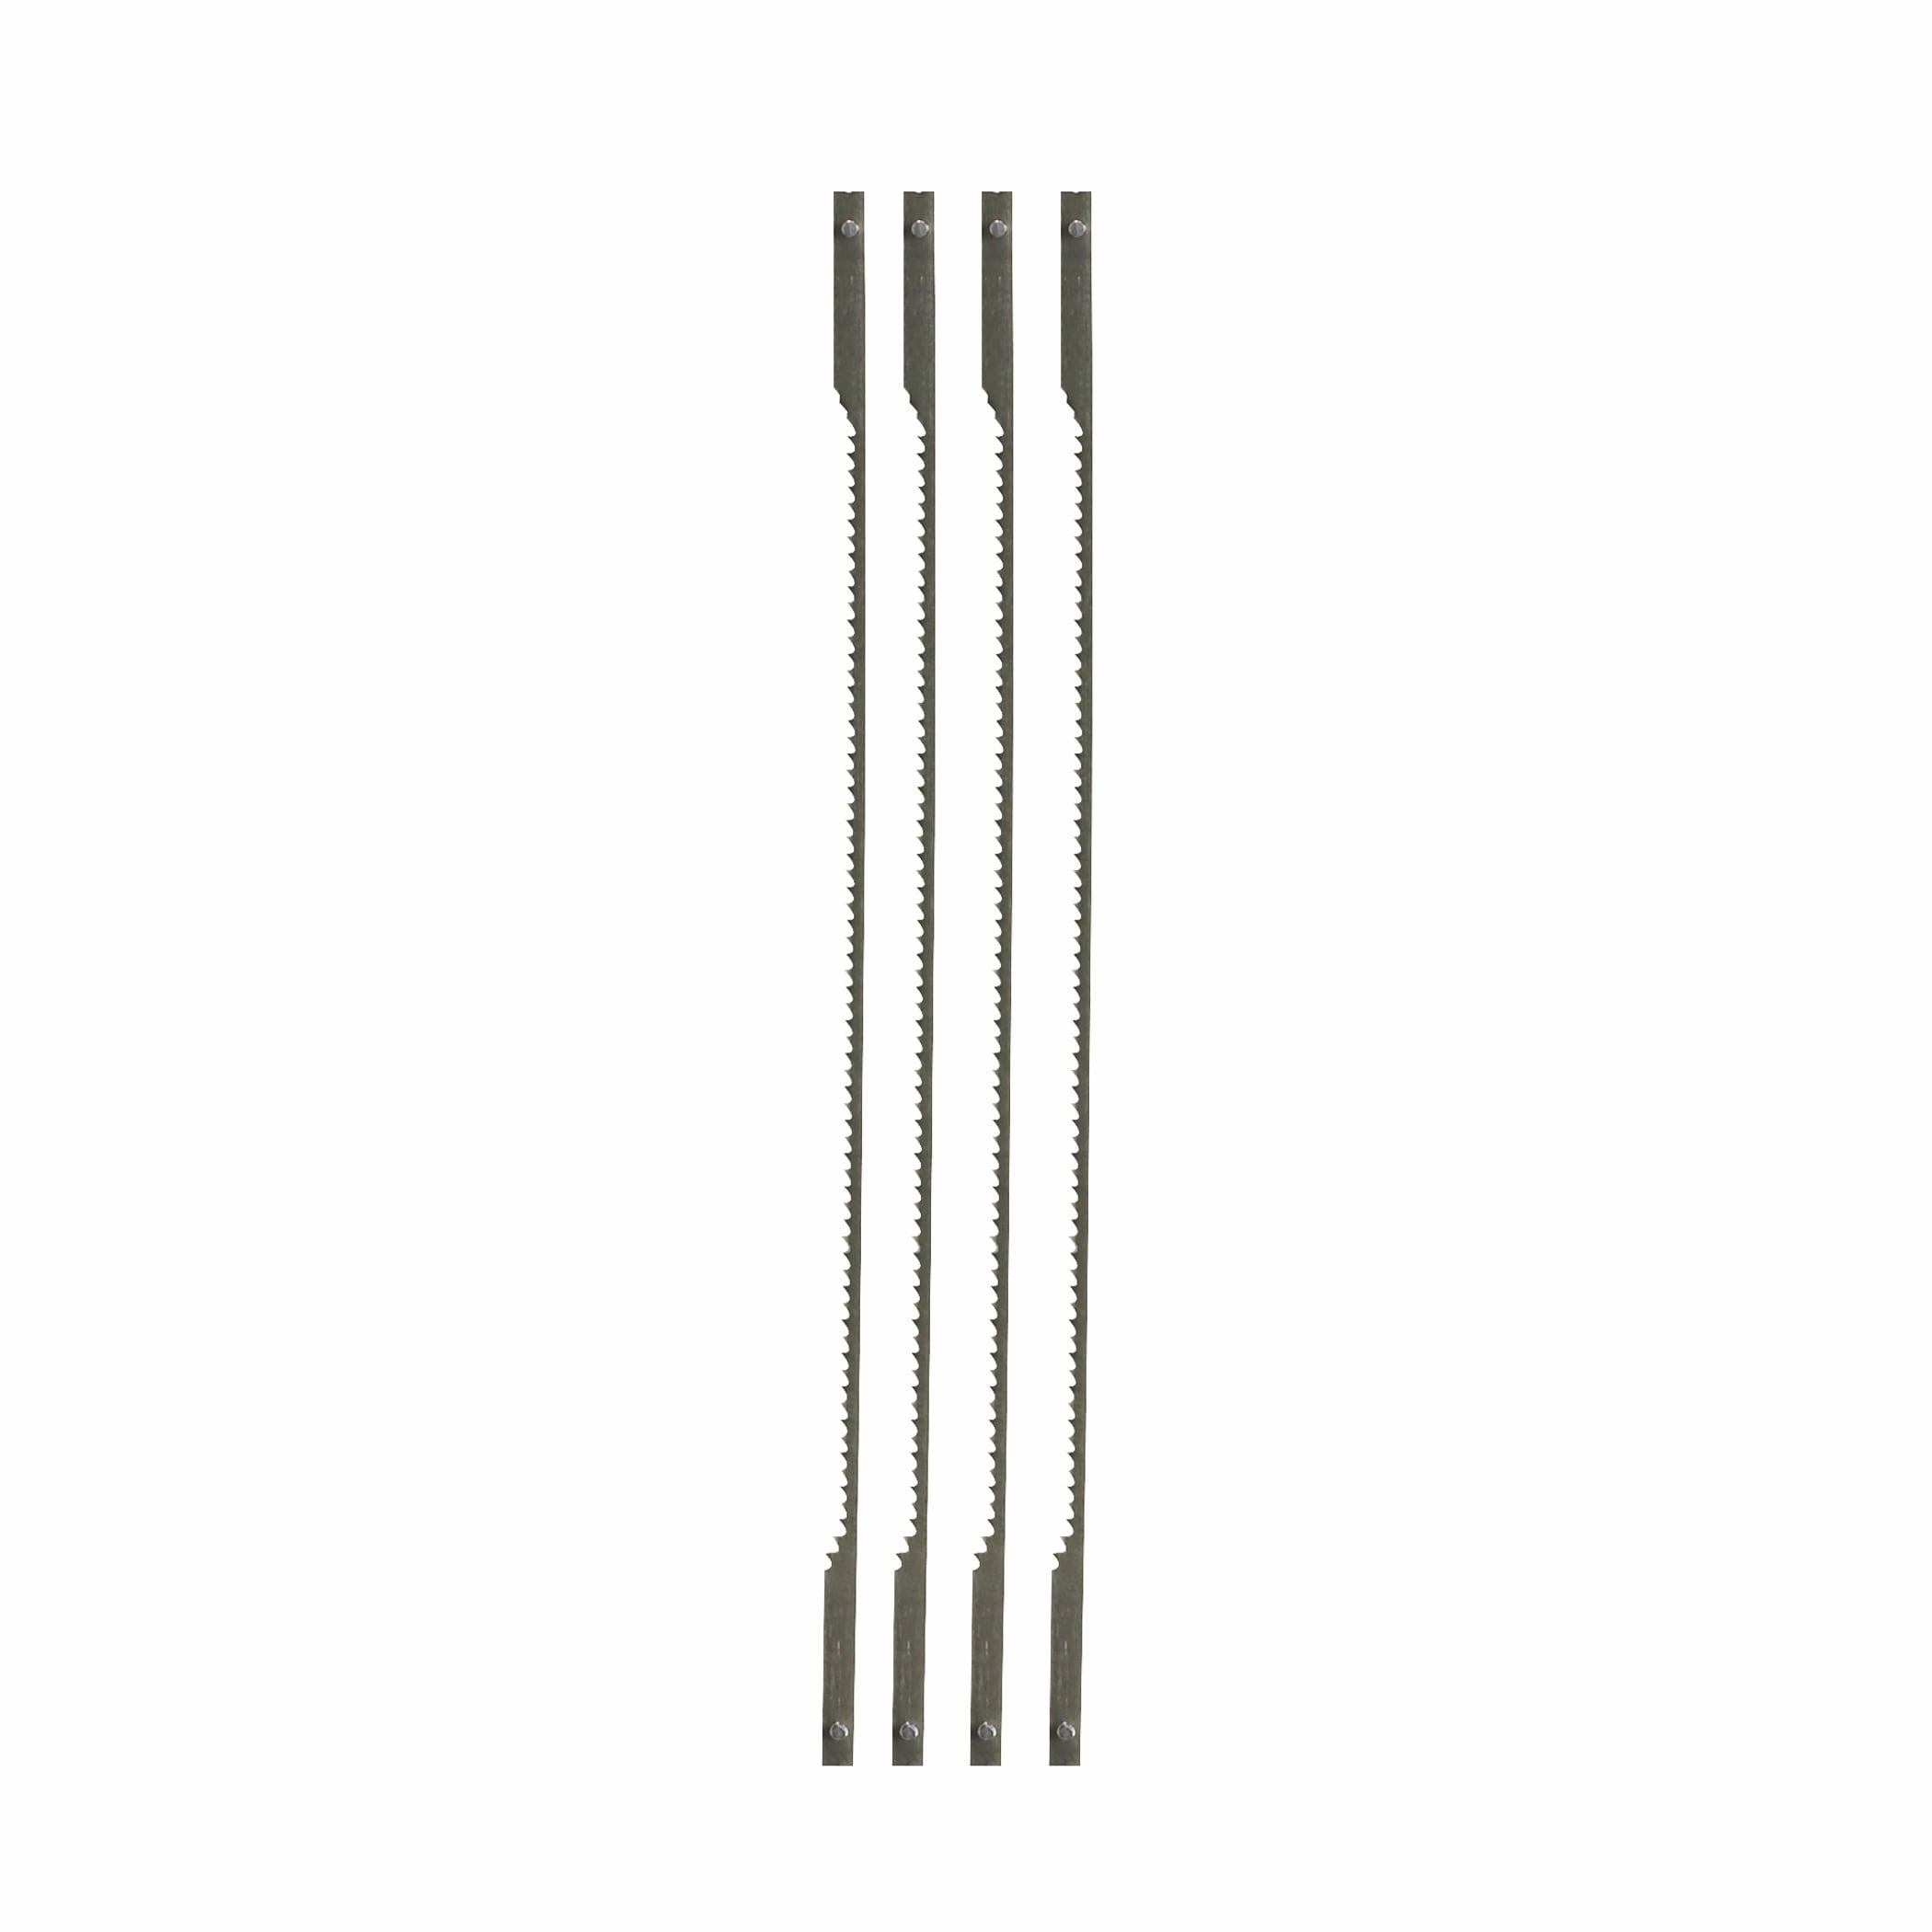 Olson Coping Saw Blades Fine 6-1/2 in. x 20 TPI, 12-Pack